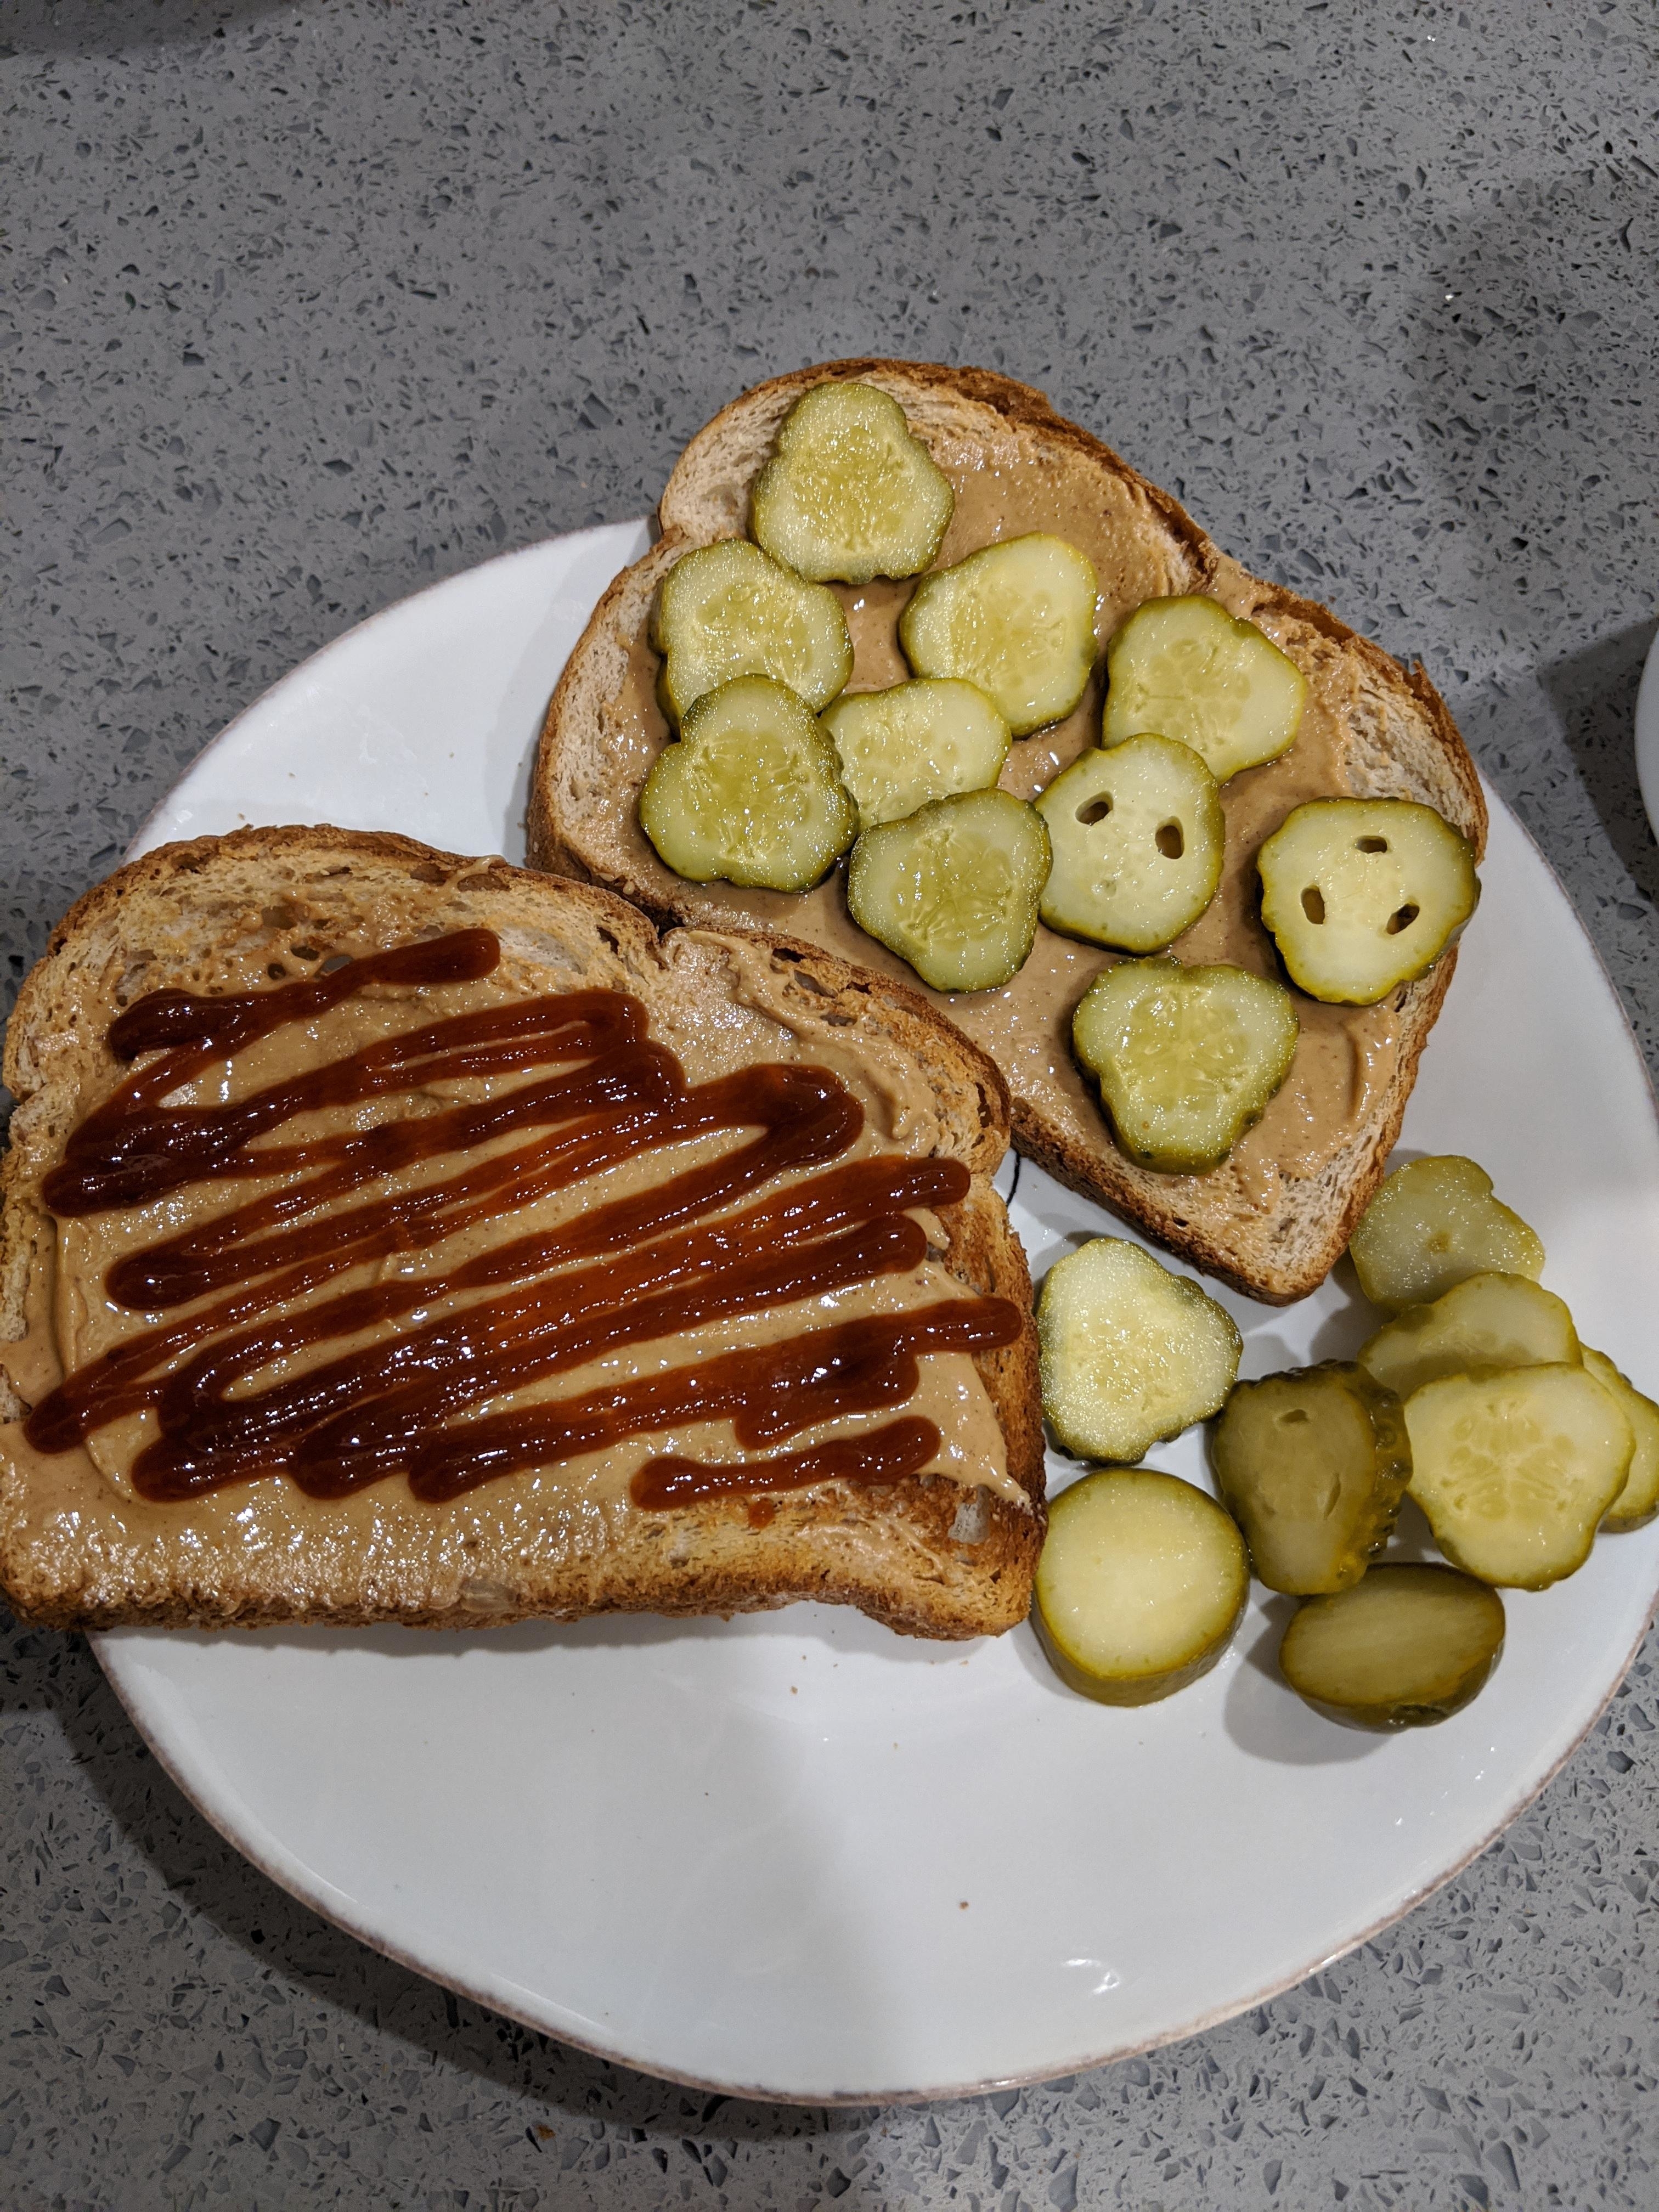 Two slices of bread on a plate; one with peanut butter and pickles, the other with peanut butter and drizzled sriracha